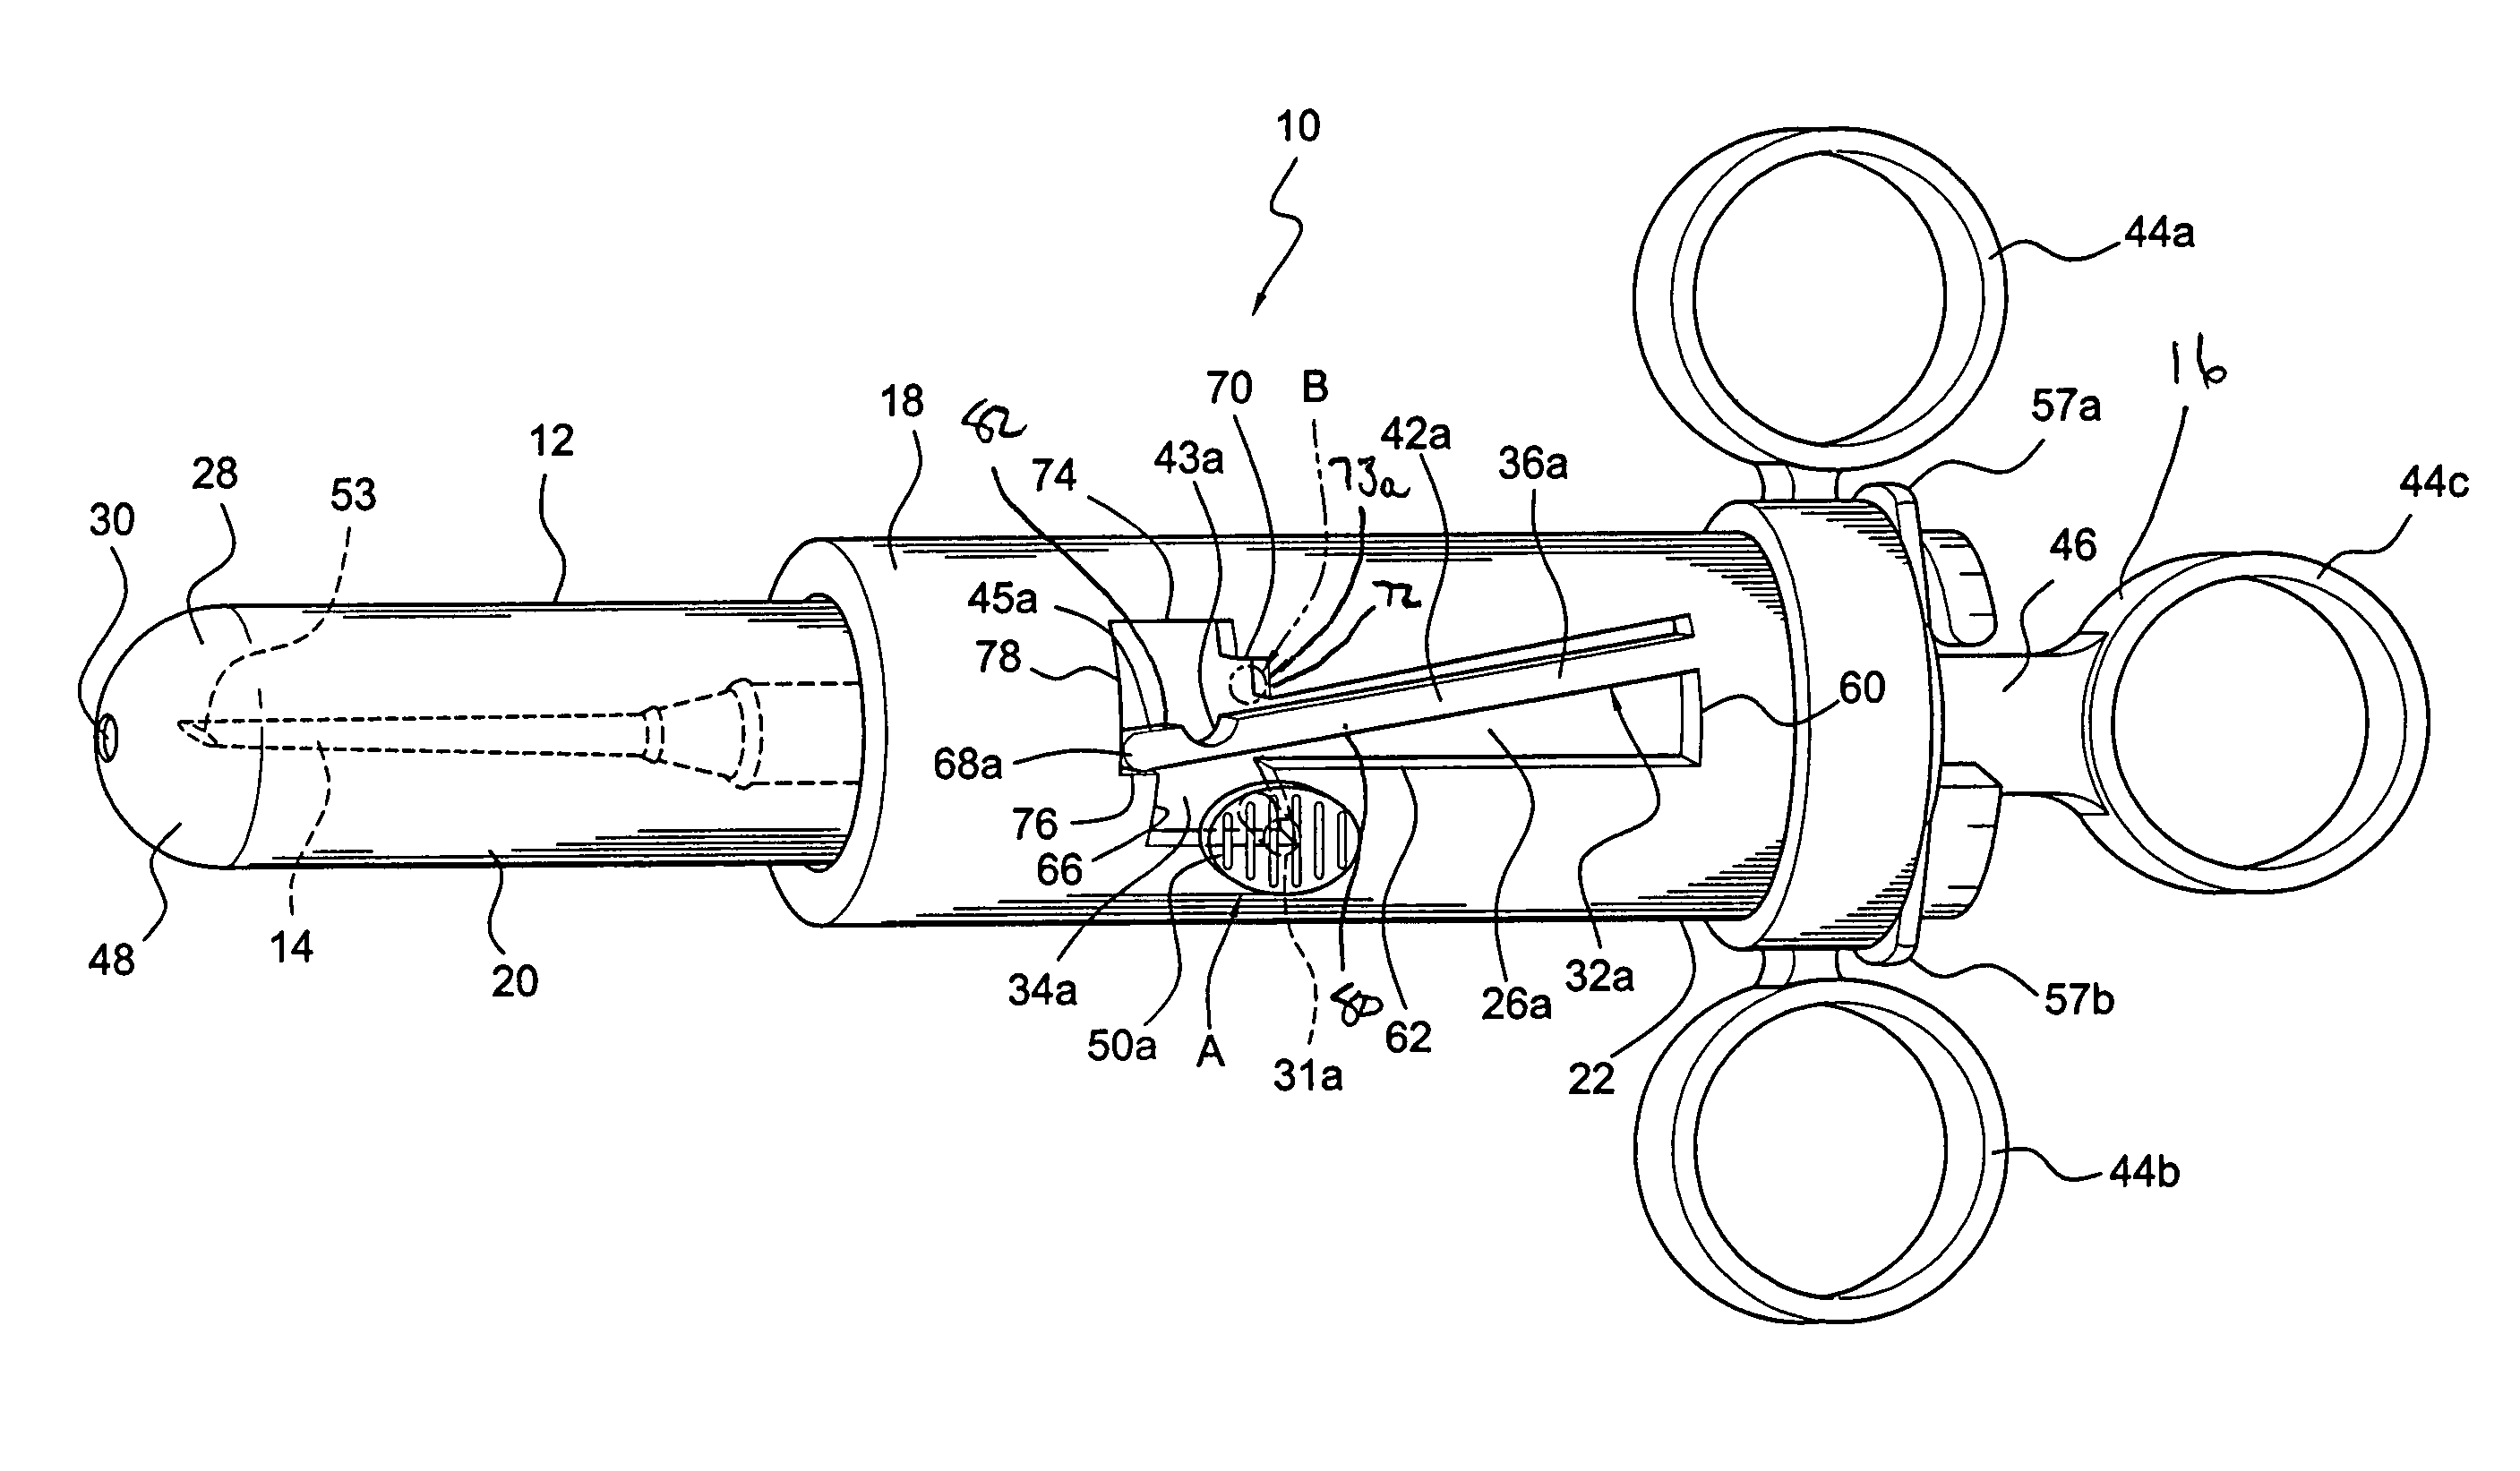 Enveloping needle stick protection device